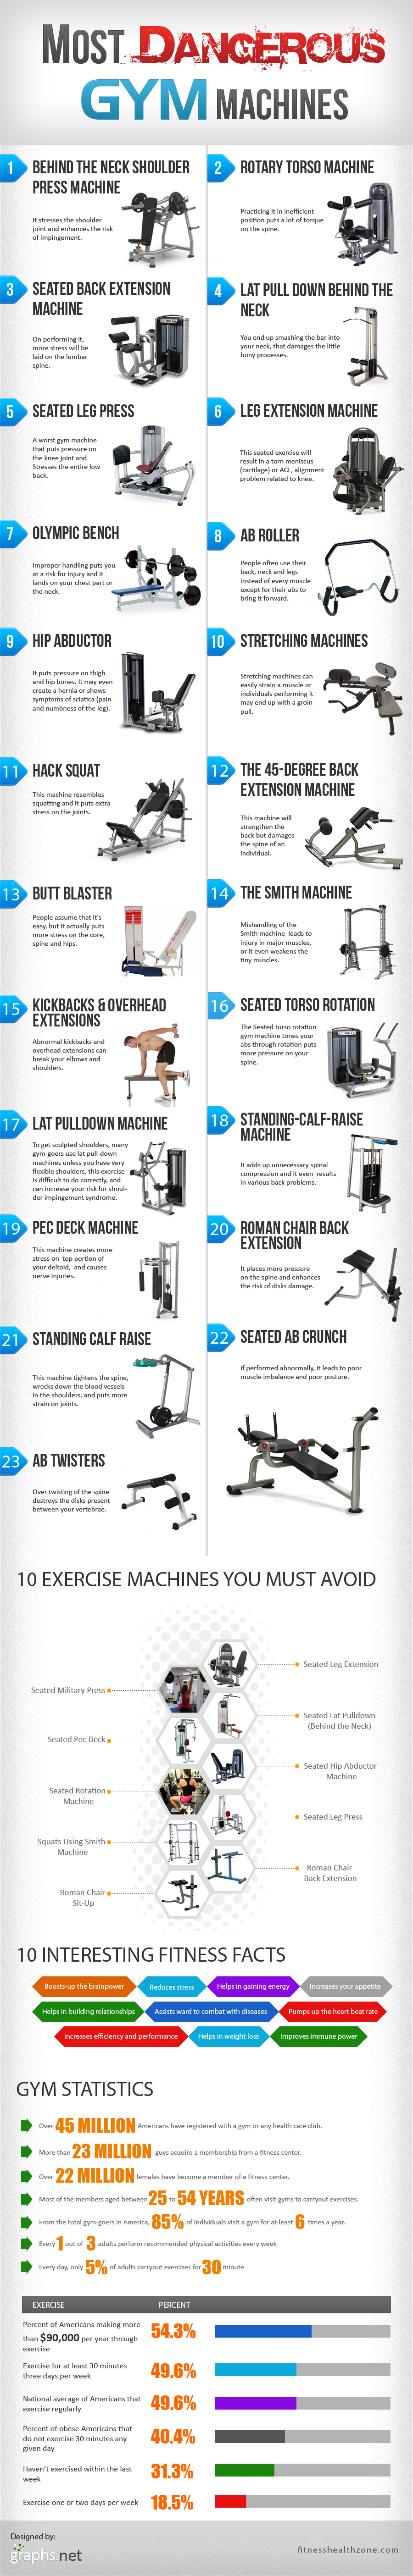 Most Dangerous Gym Machines (Infographic)